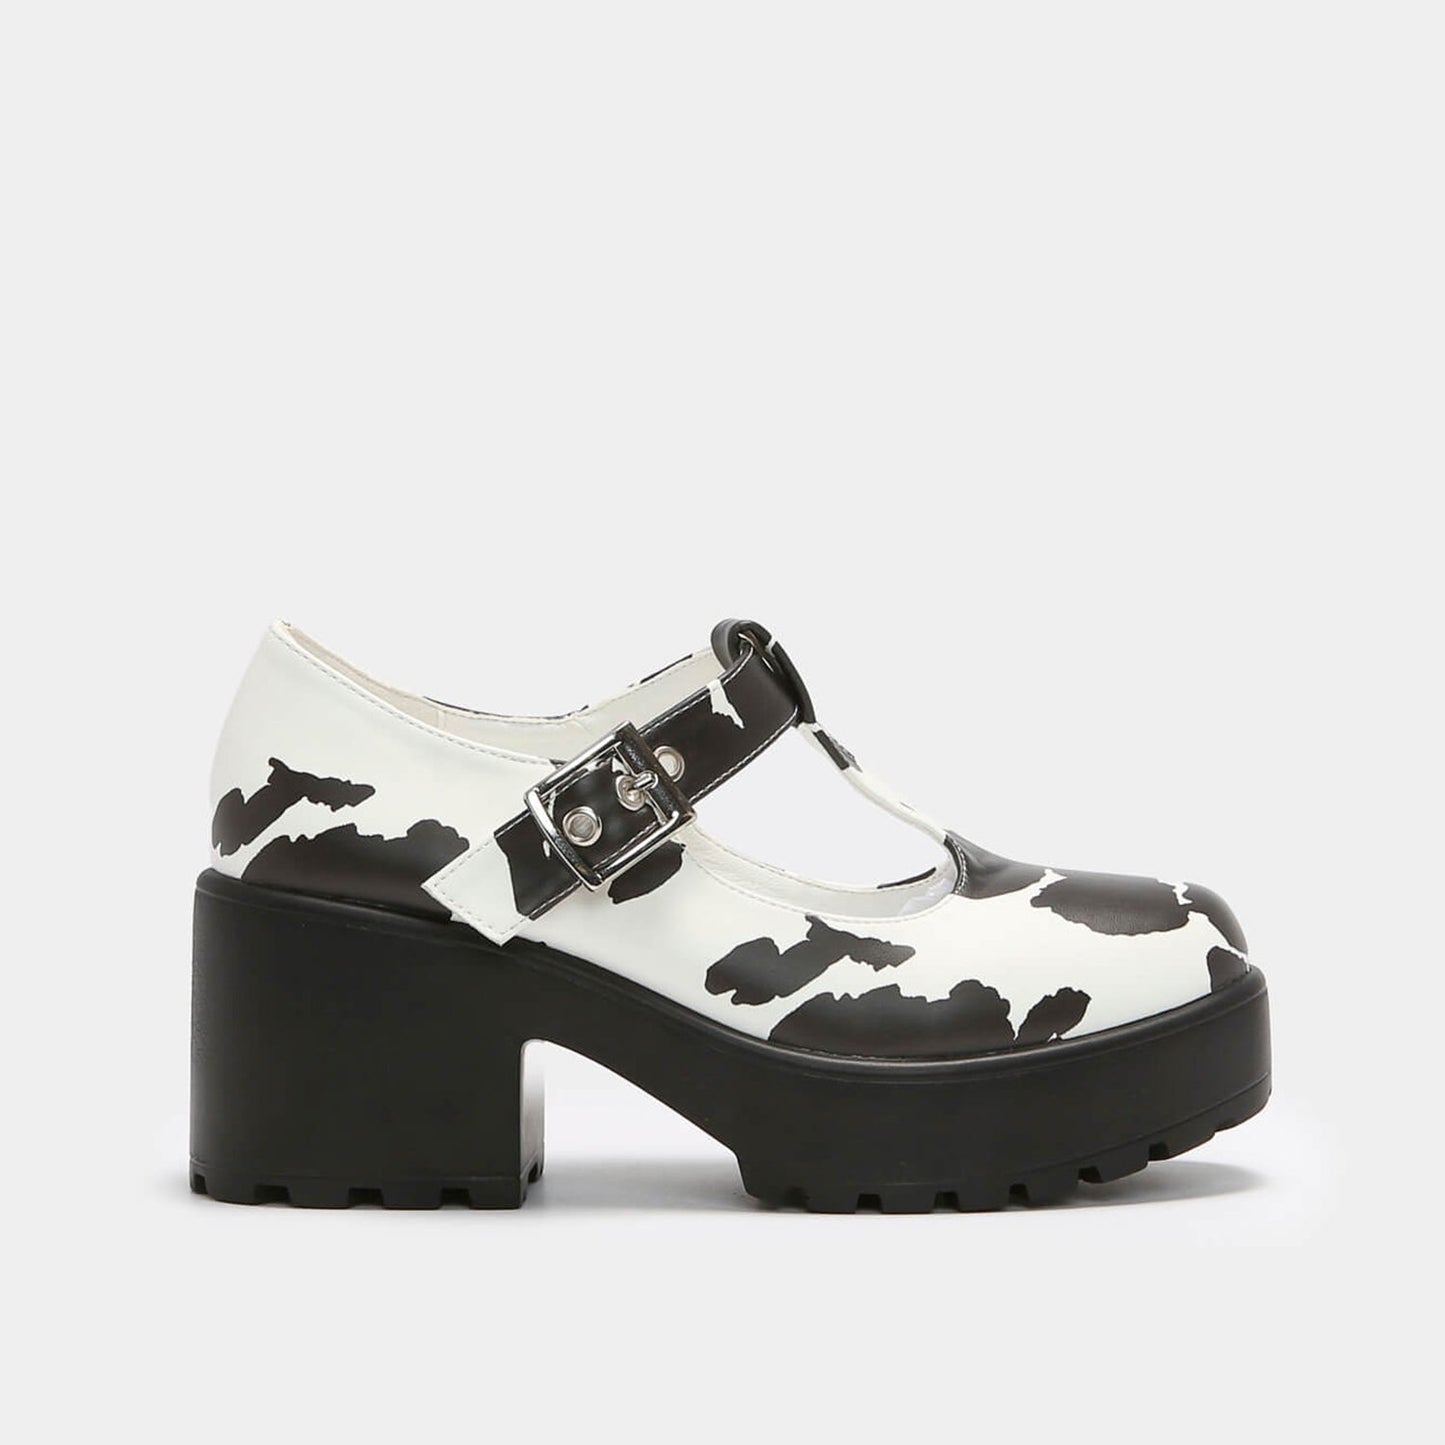 Sai Cow Print Mary Jane Shoes 'Nettie Edition' - Mary Janes - KOI Footwear - White - Side View